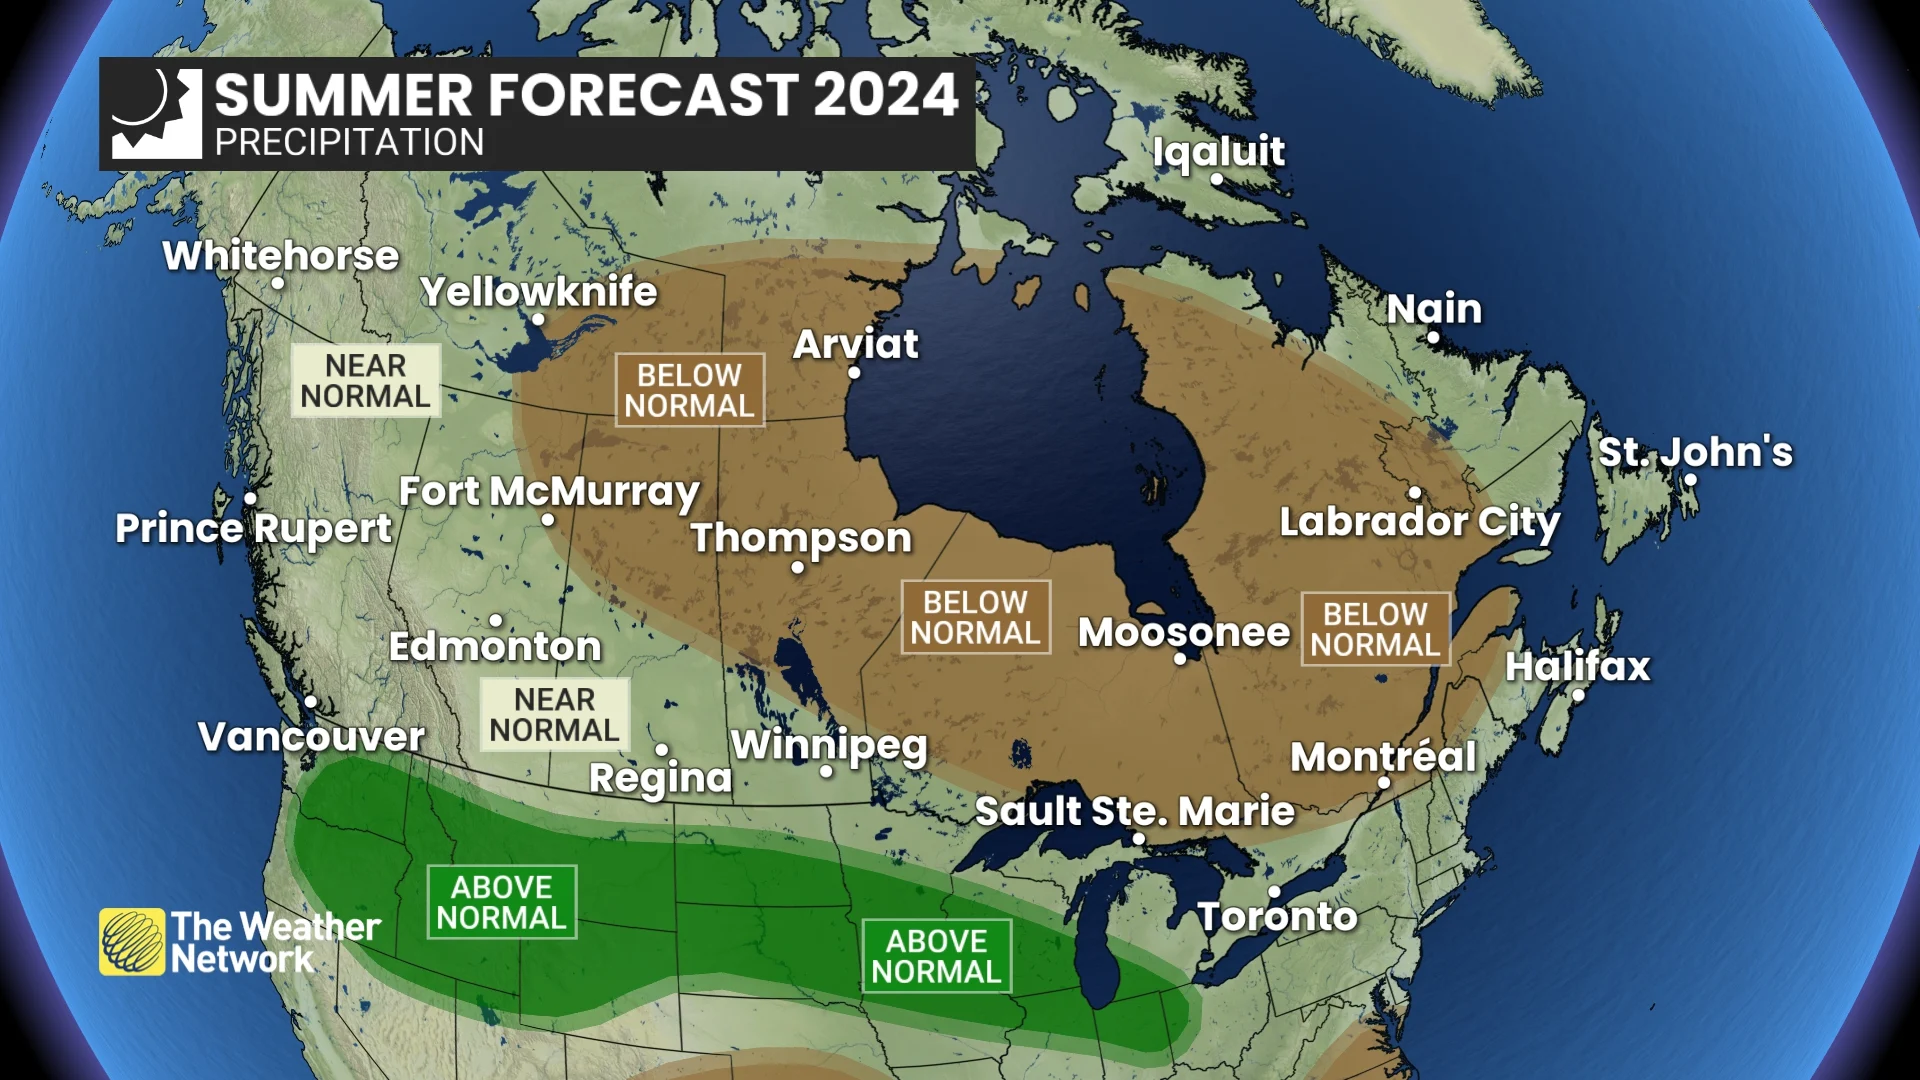 The Weather Network: 2024 Summer Forecast - Precipitation Outlook